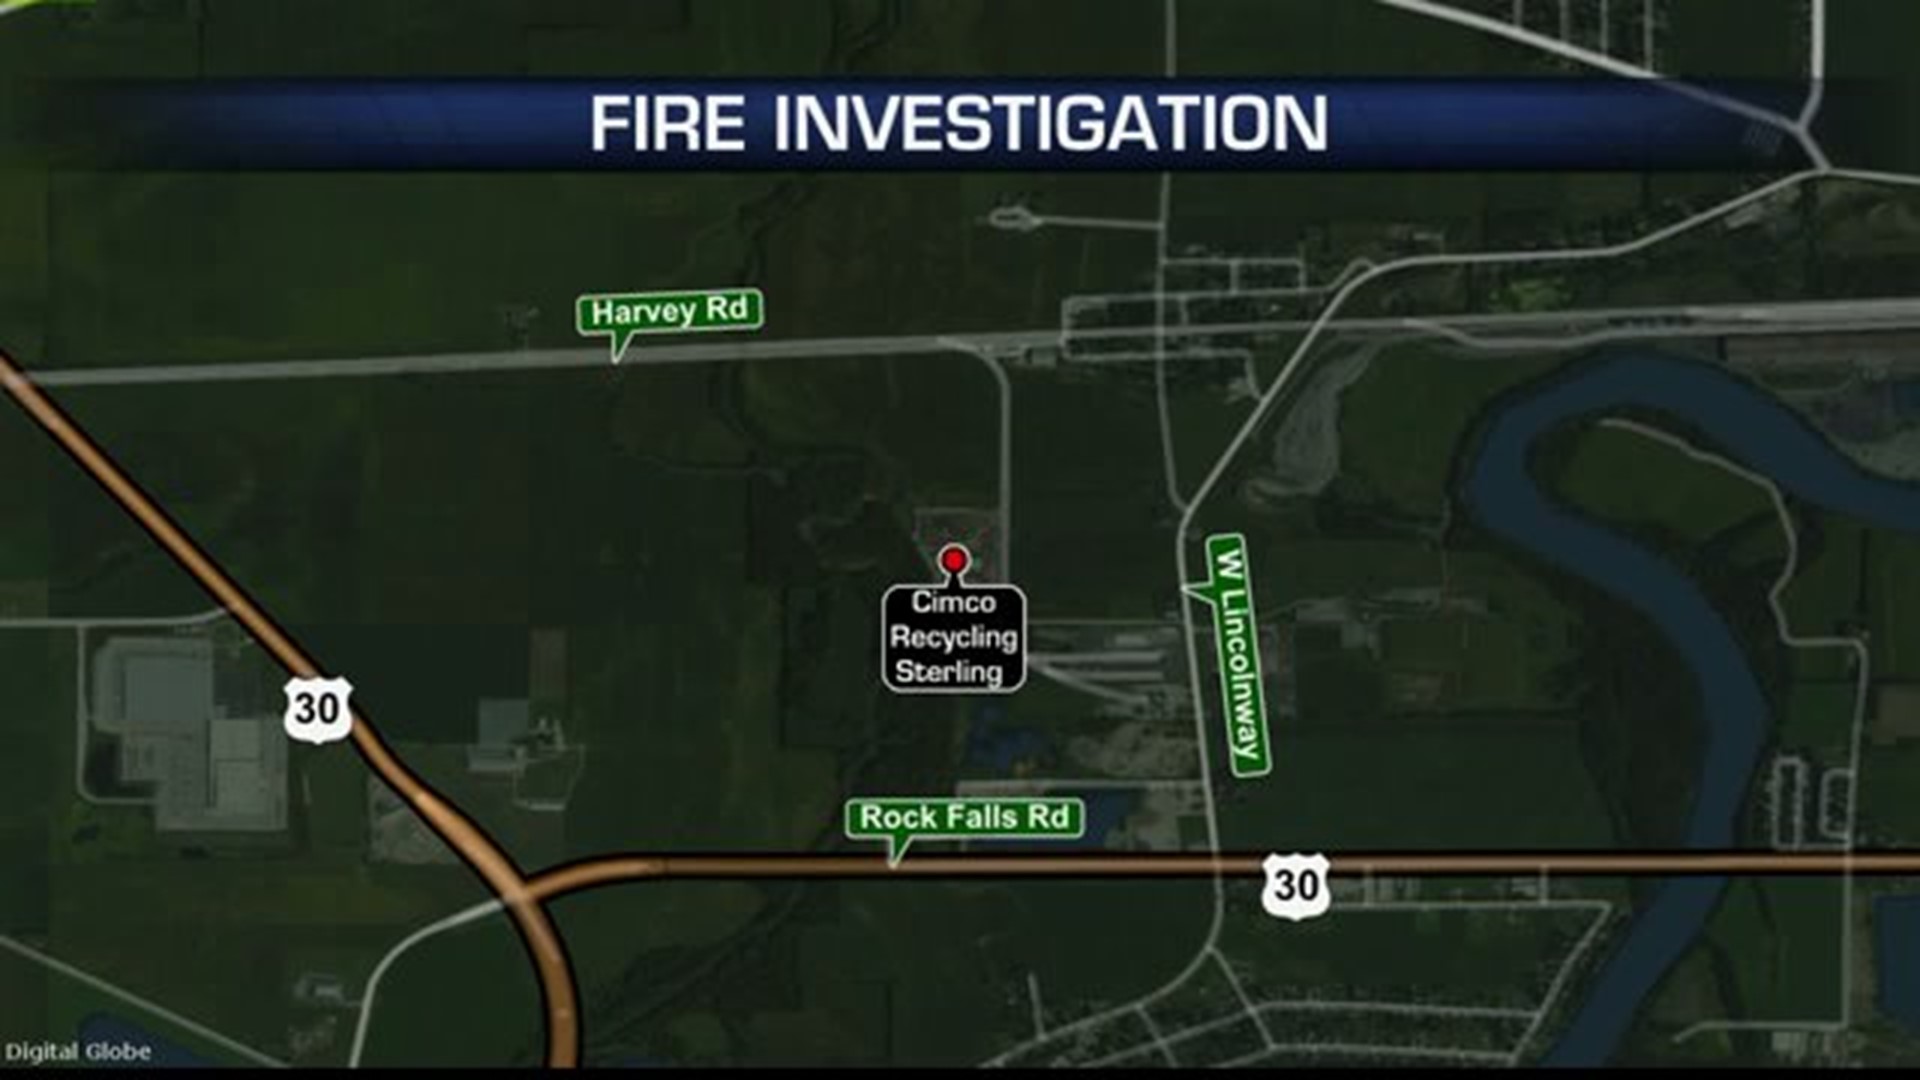 Fire erupts at Sterling recycling center